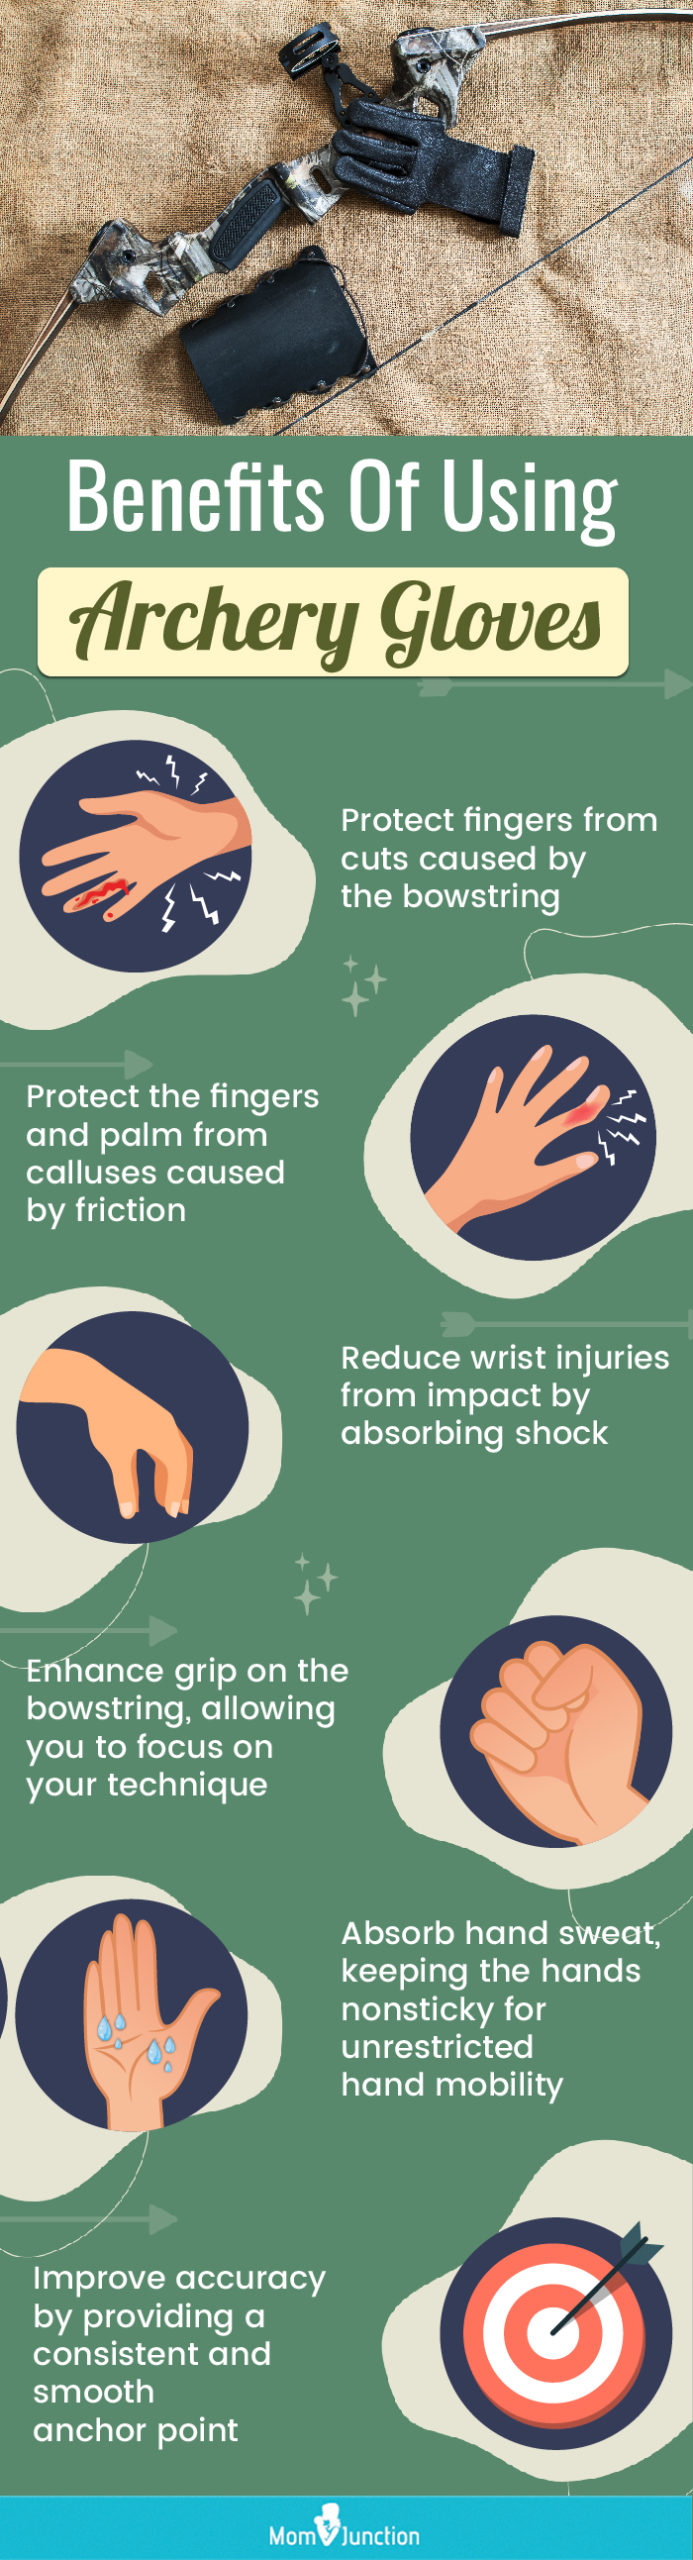 Benefits Of Using Archery Gloves (infographic)